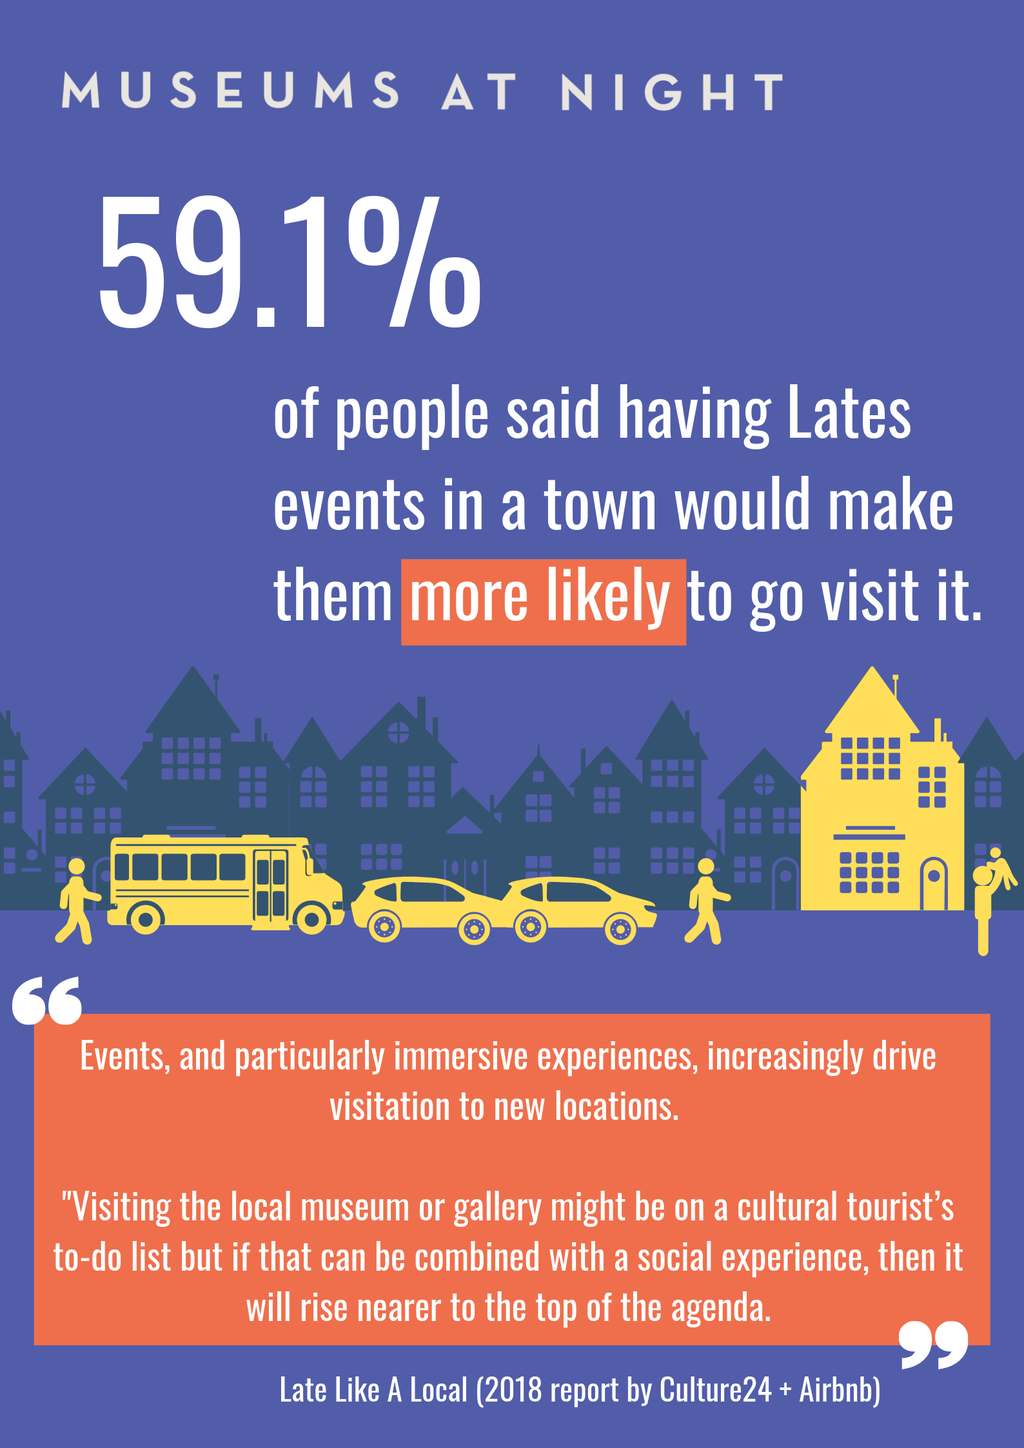 Lates Herefordshire museums infographic